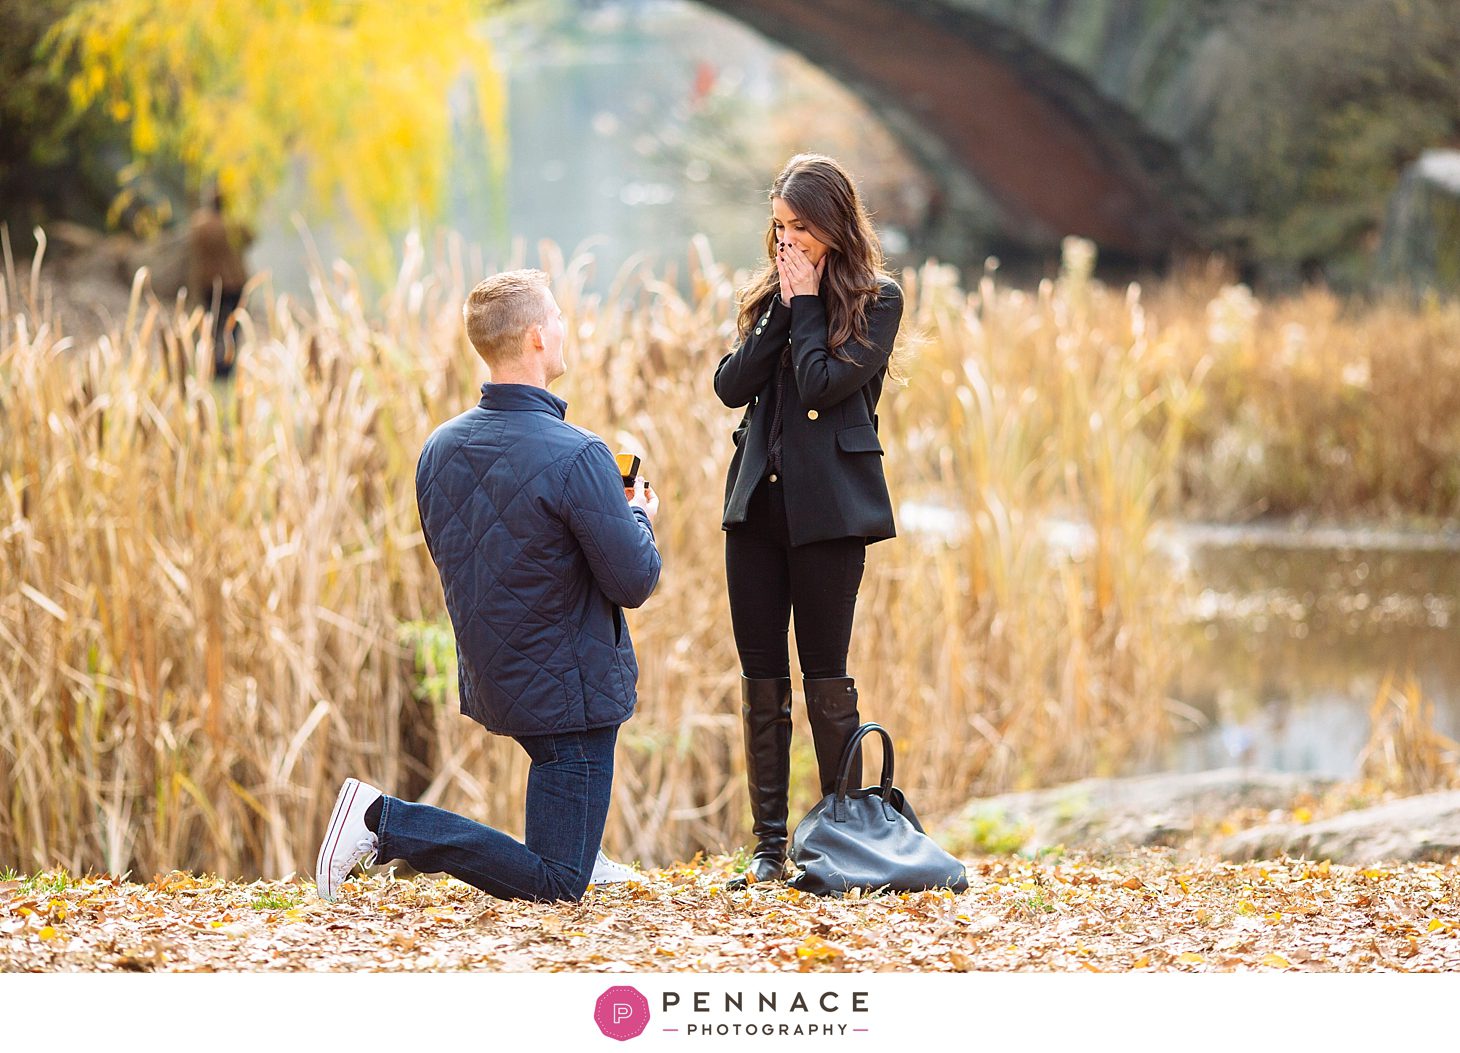 By Laura Pennace - http://www.facebook.com/pennacephotography